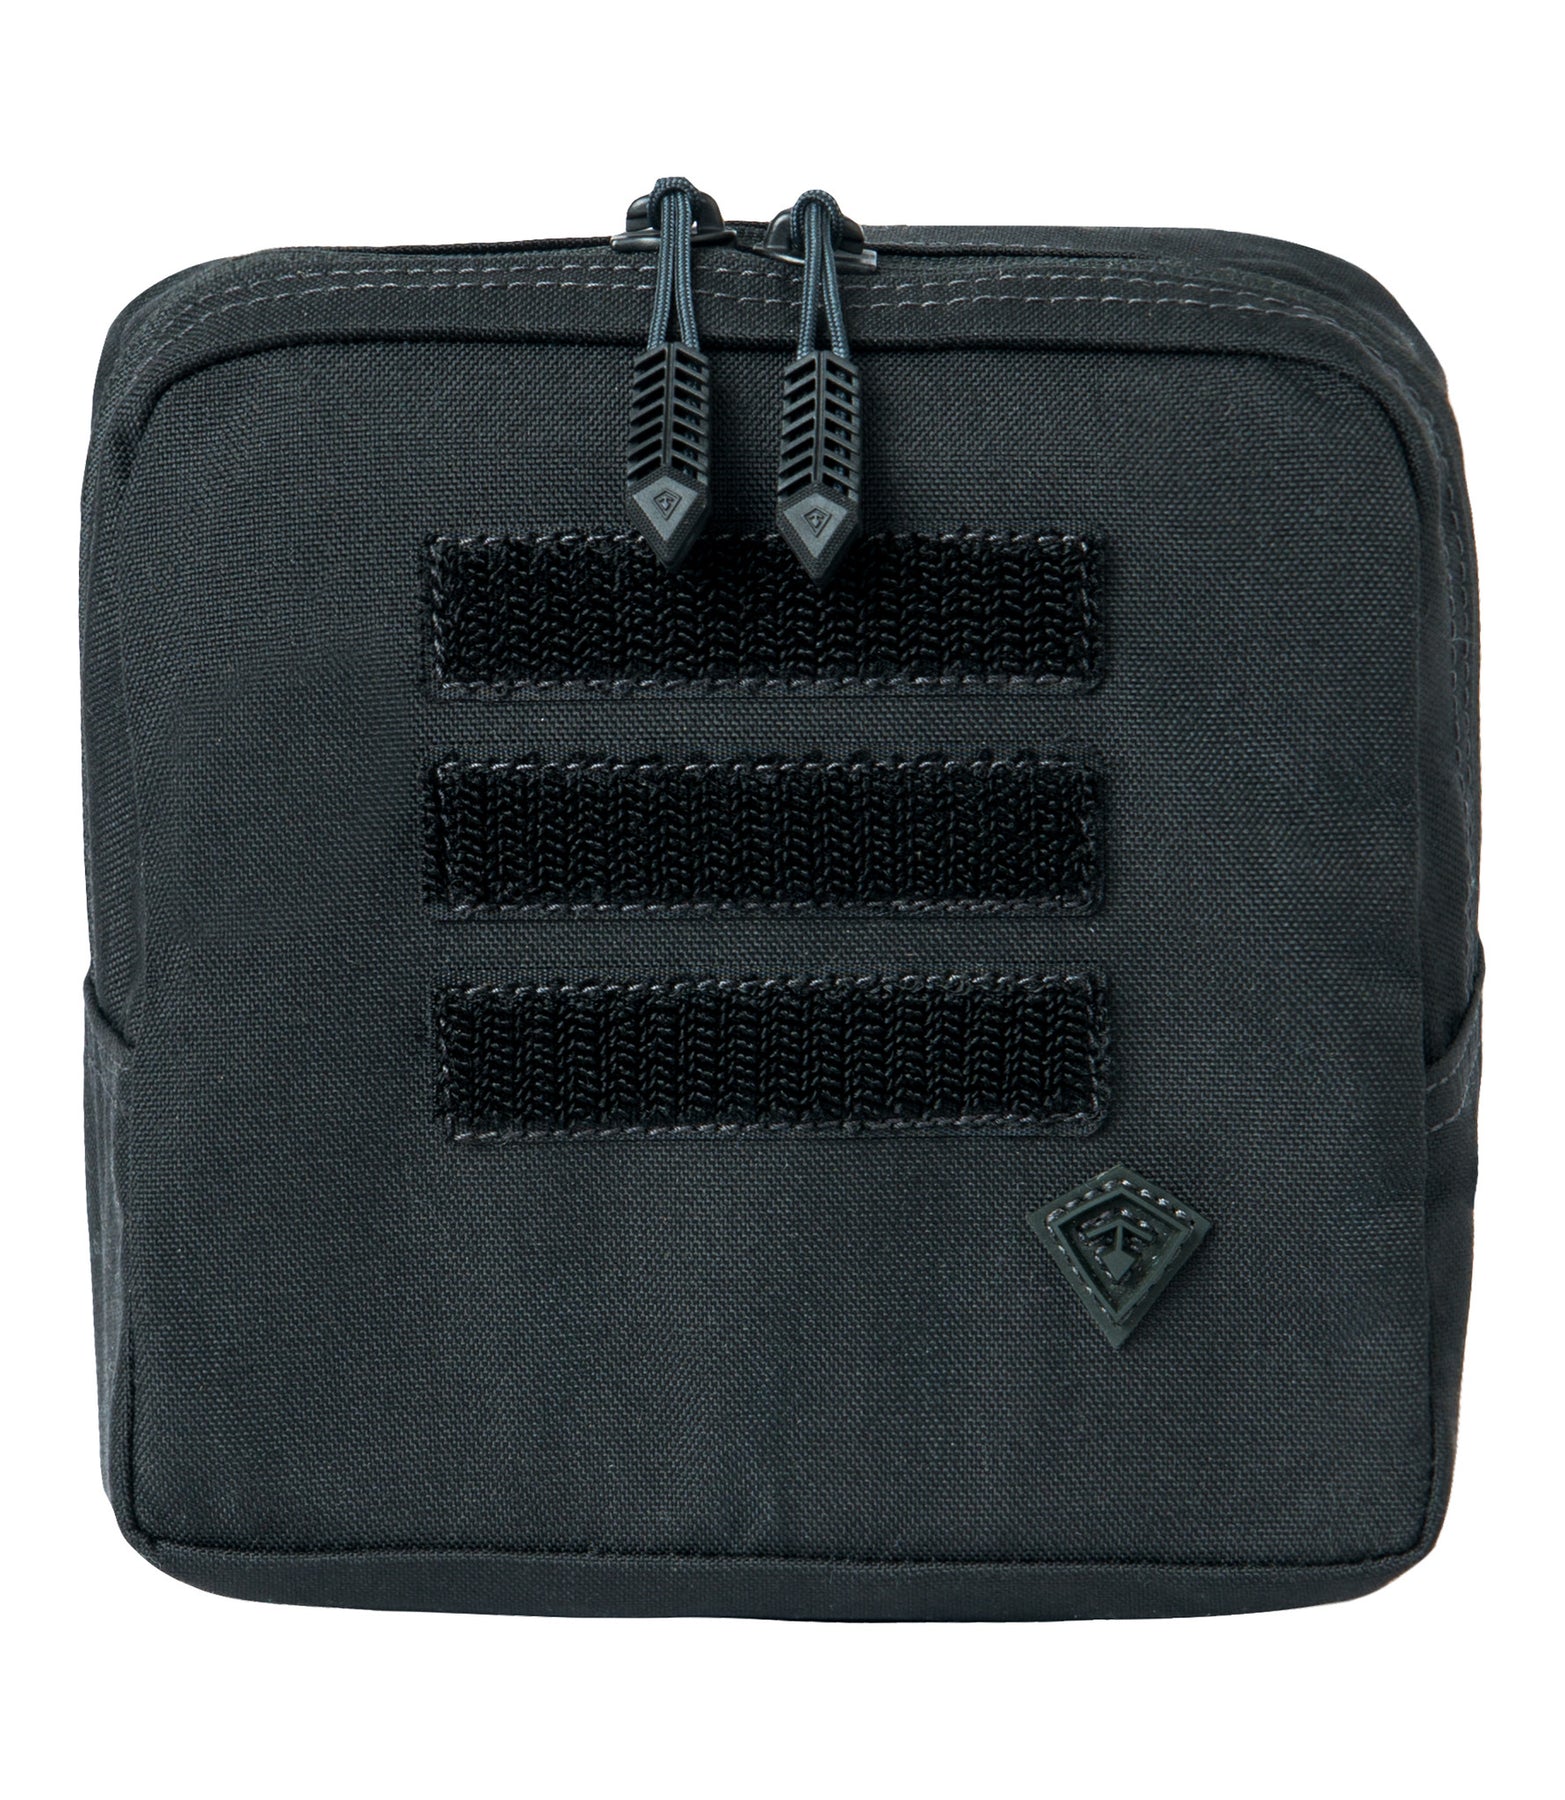 First Tactical tactix 6x6 Utility Pouch, Black